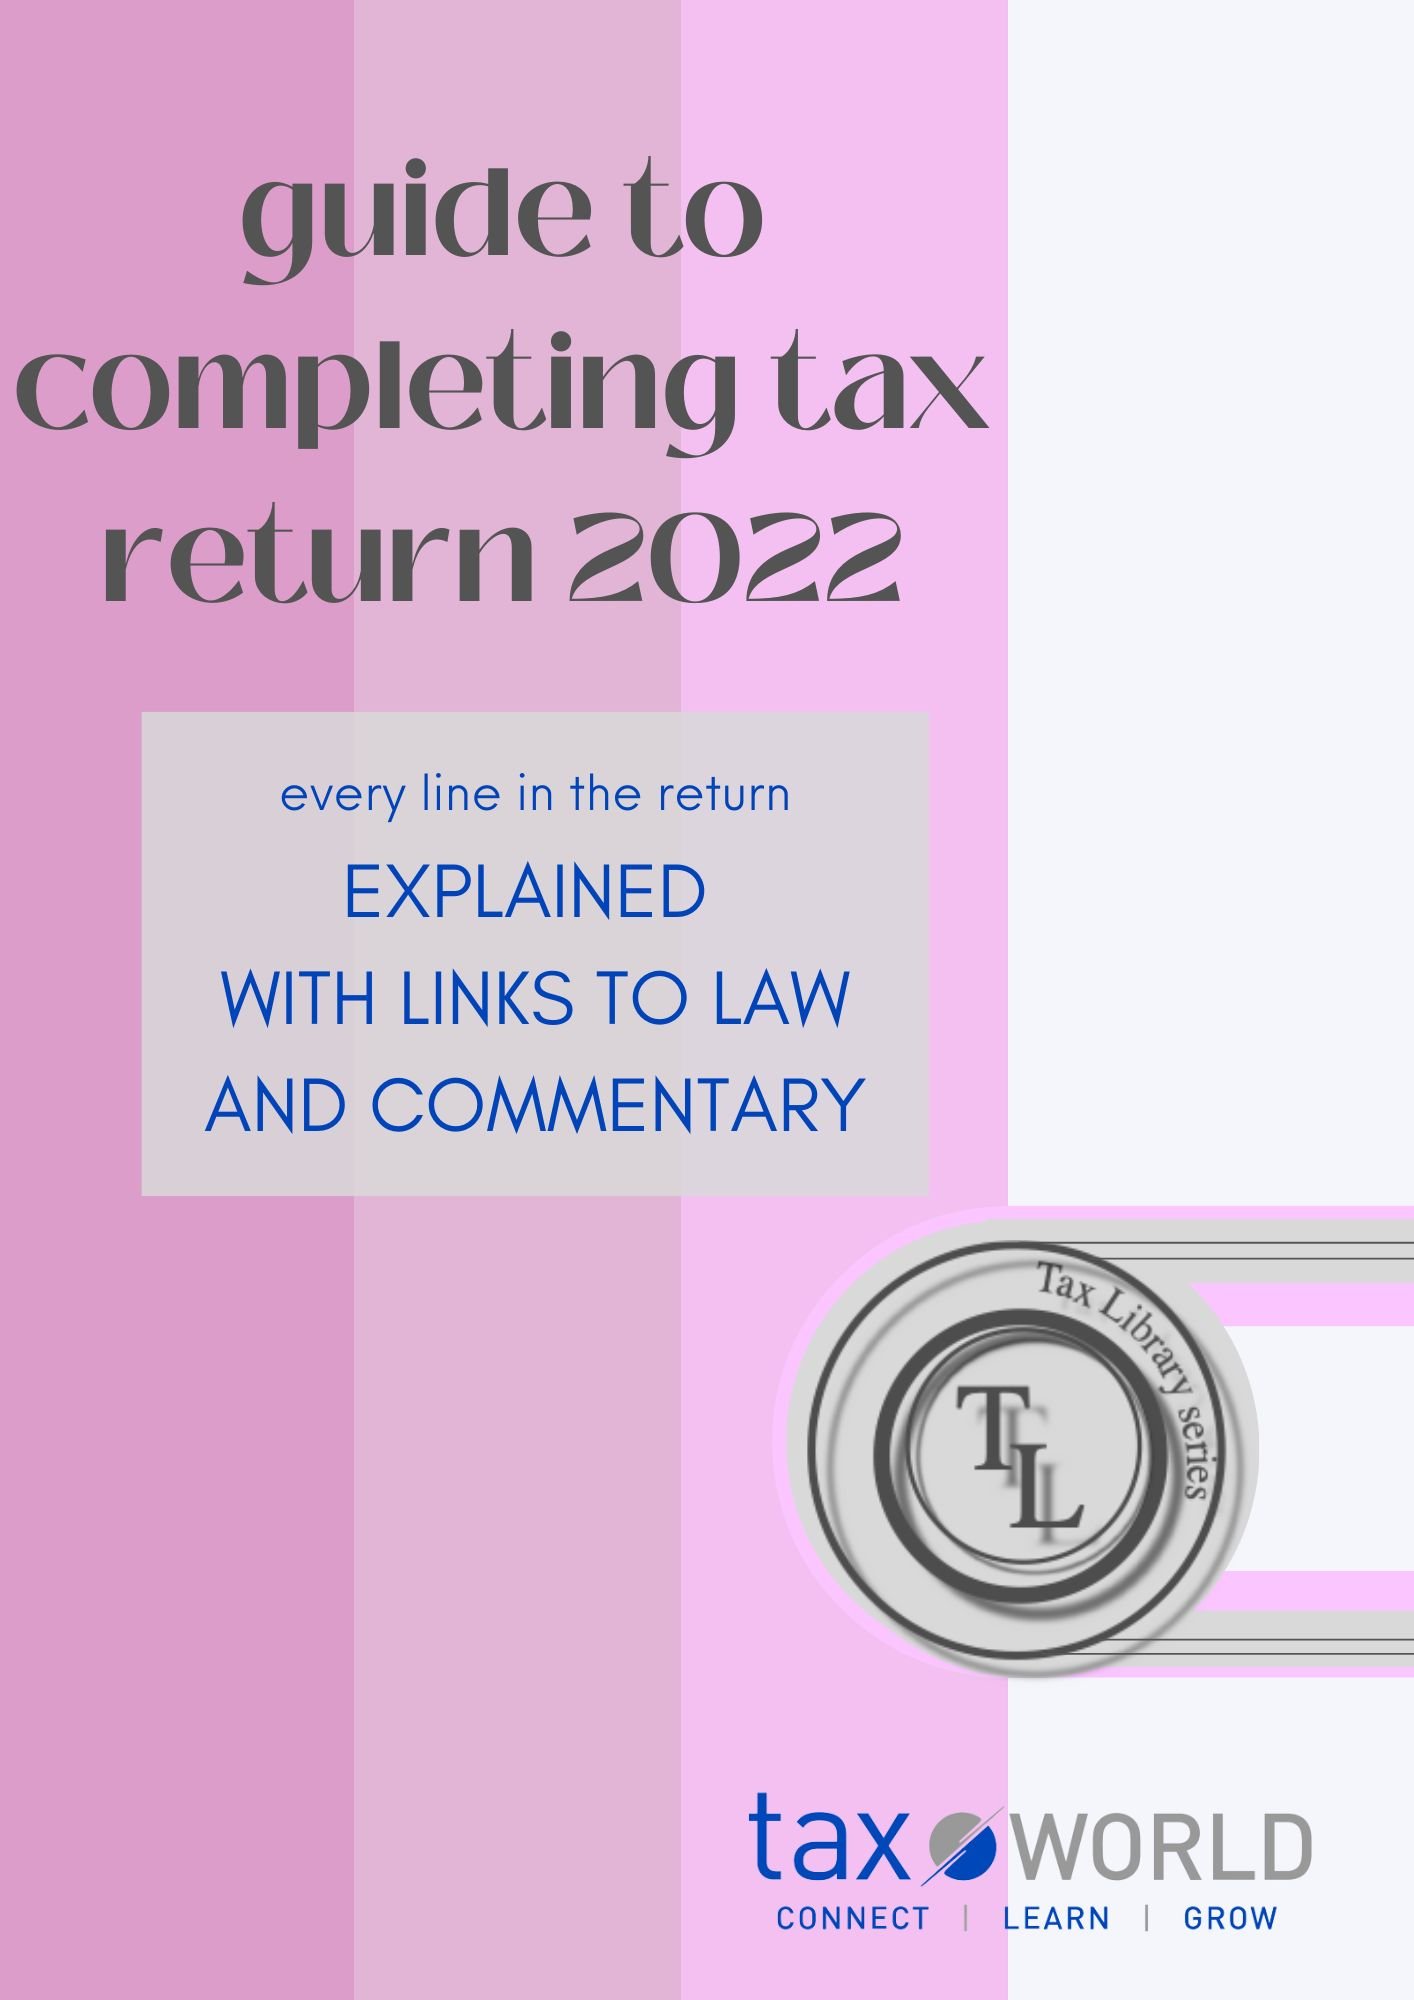 Guide to completing tax return 2022